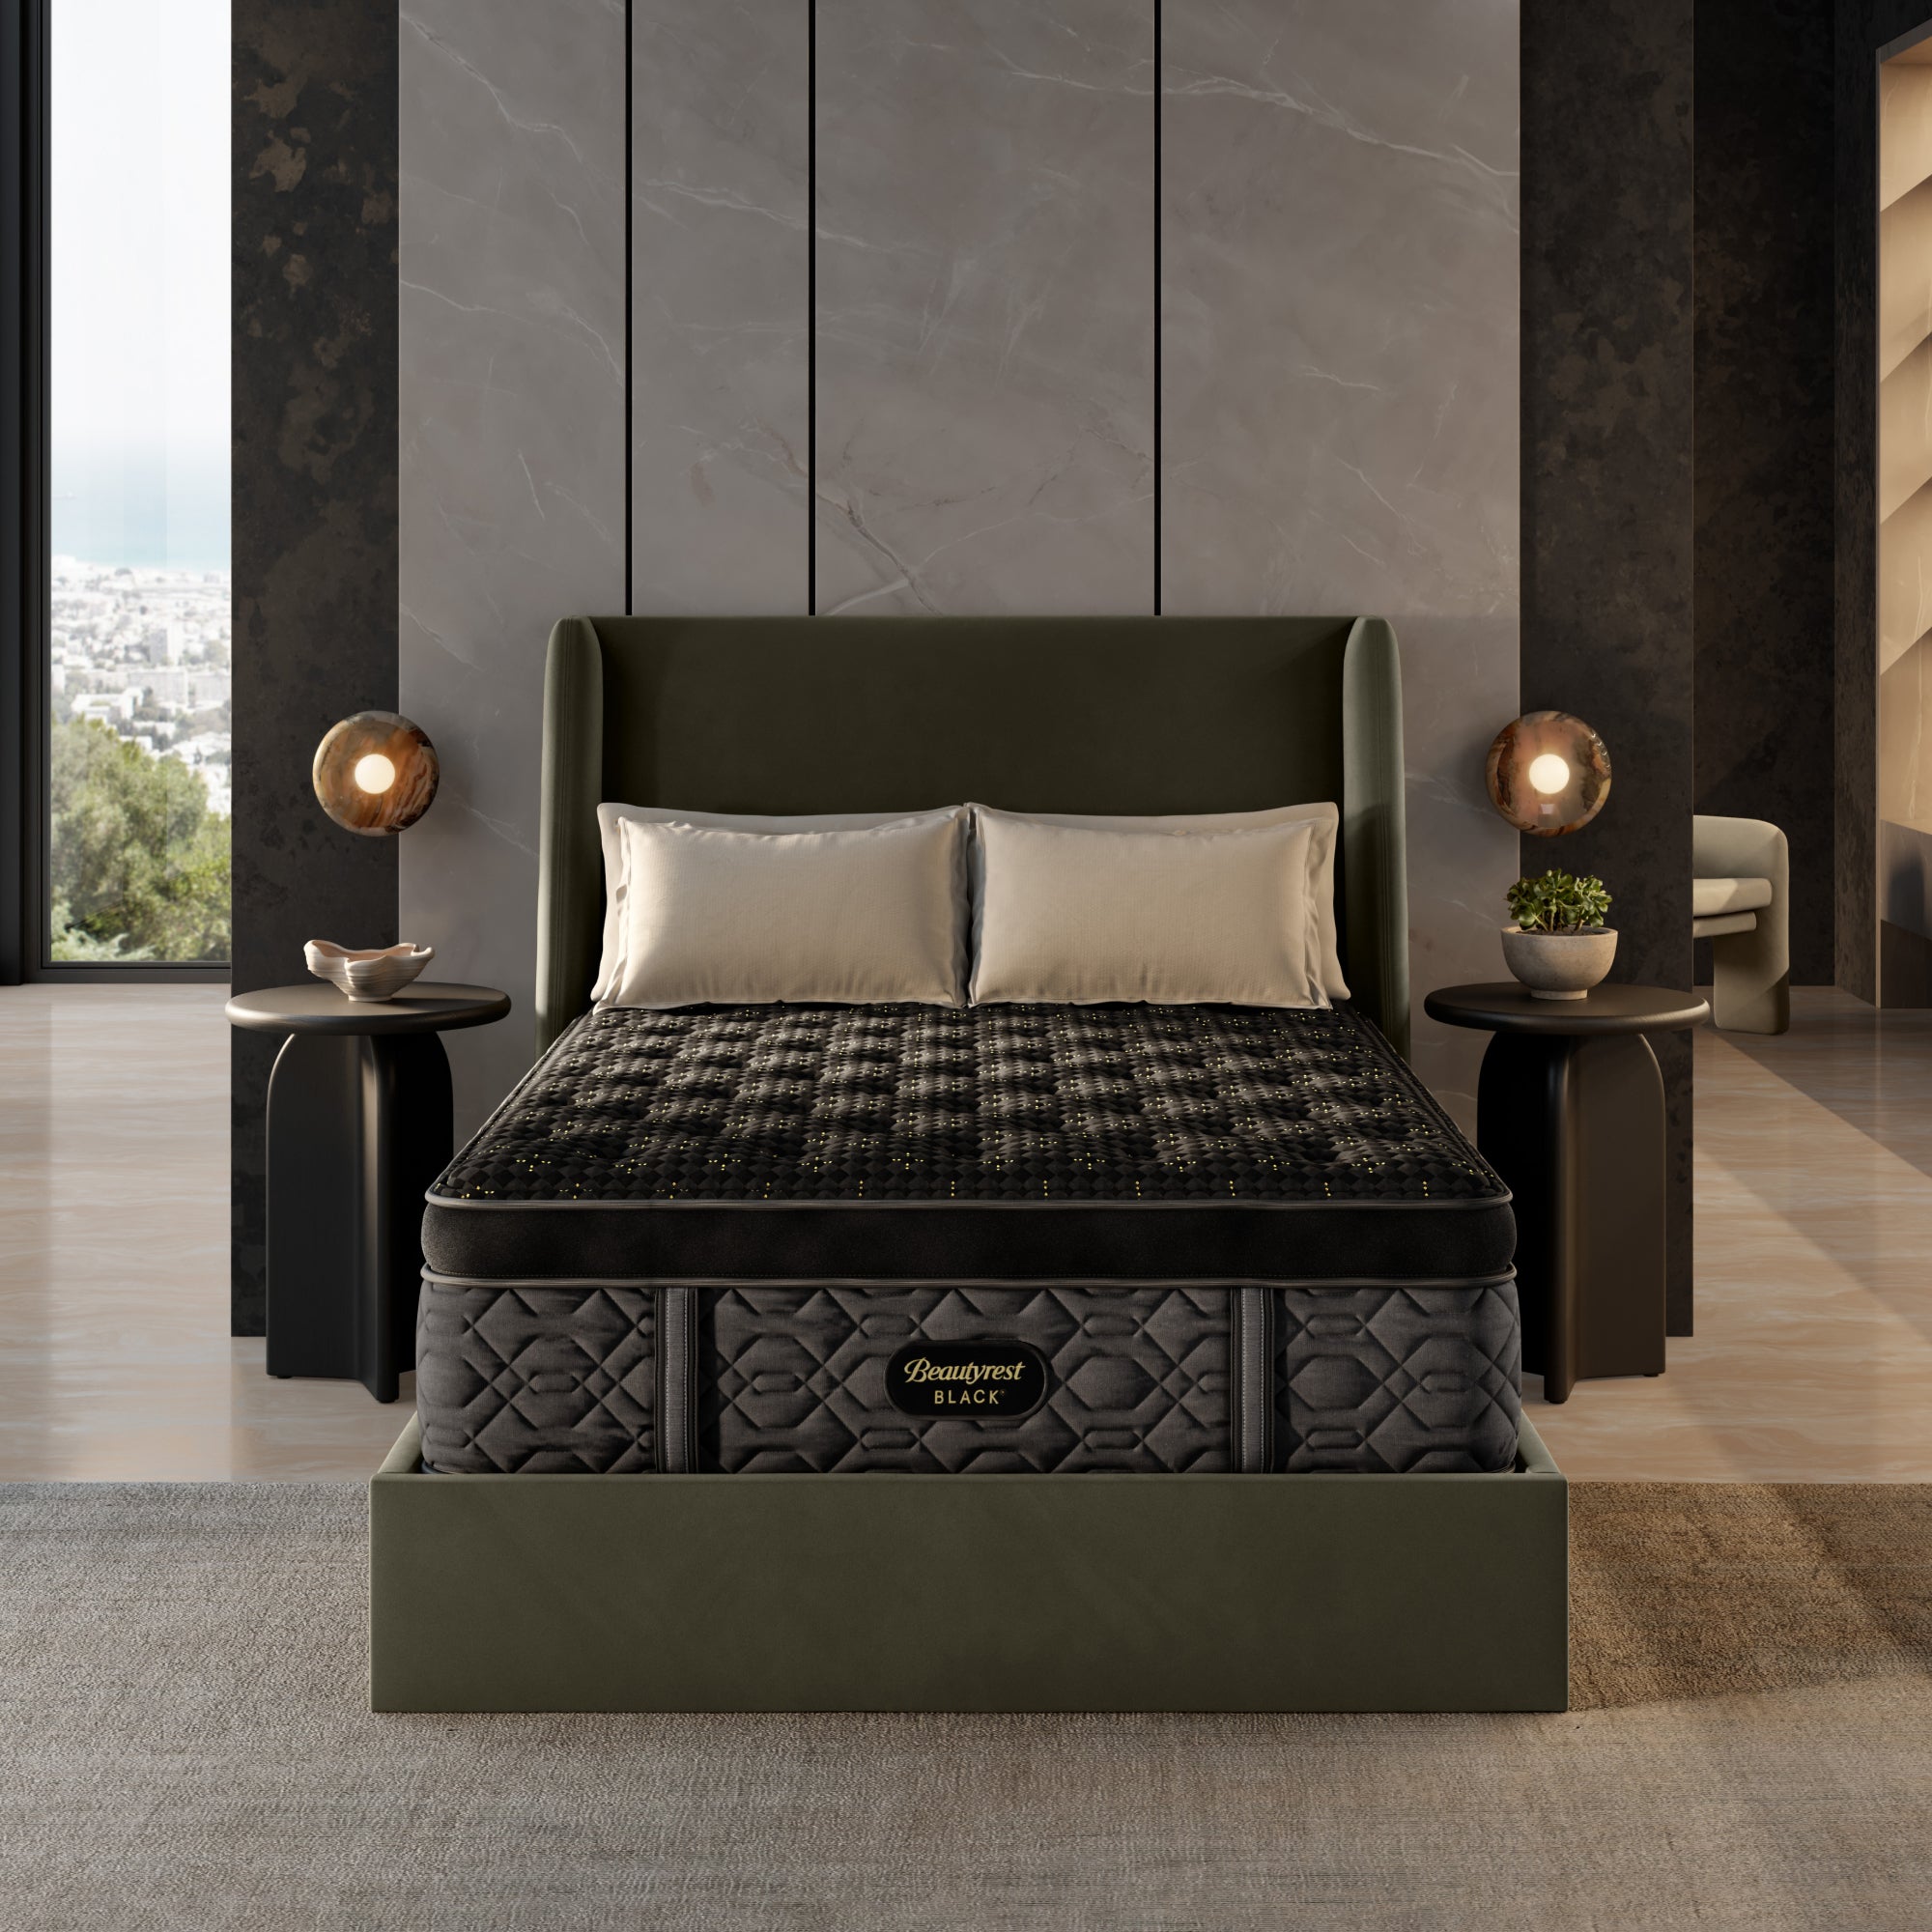 The Beautyrest Black medium summit pillow top mattress in a bedroom on a forest green bed frame || series: Series Four || feel: medium summit pillow top